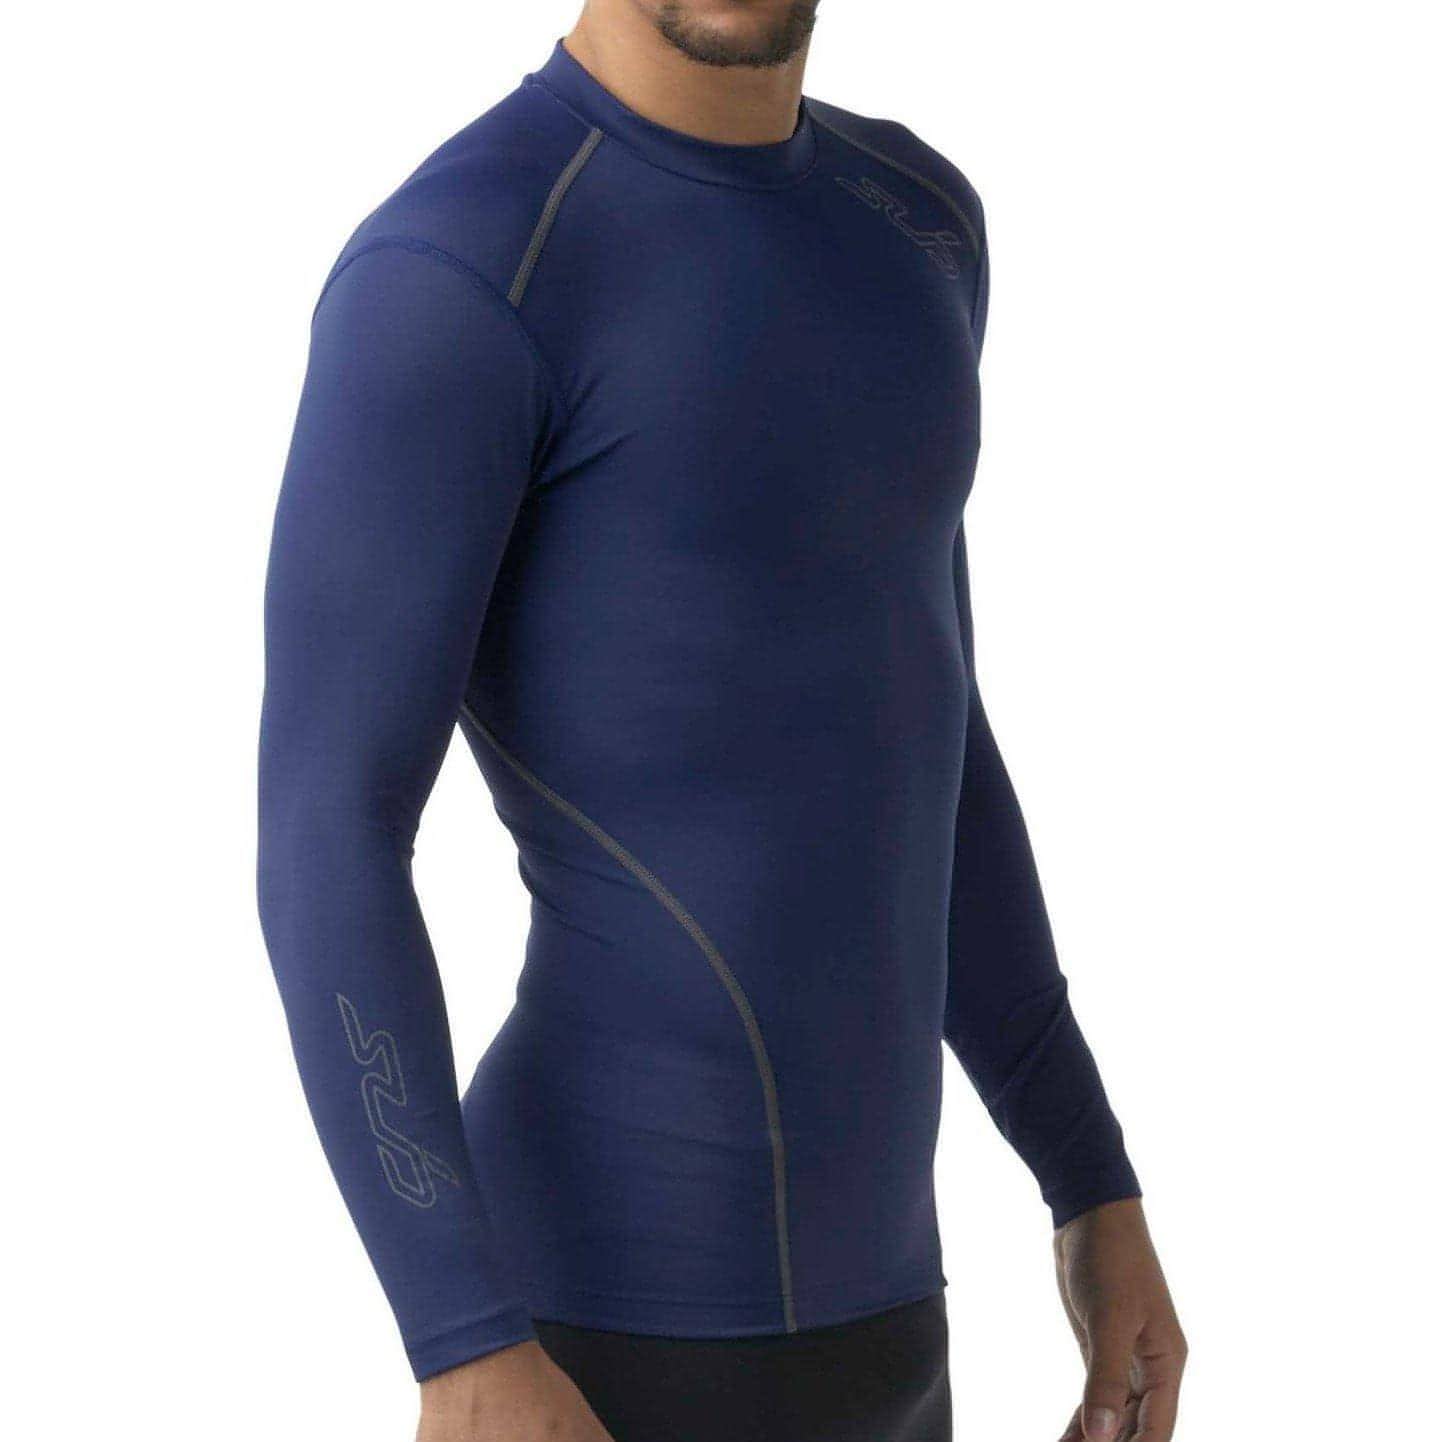 Sub Sports Dual 2.0 Long Sleeve Mens Compression Top - Blue - Start Fitness